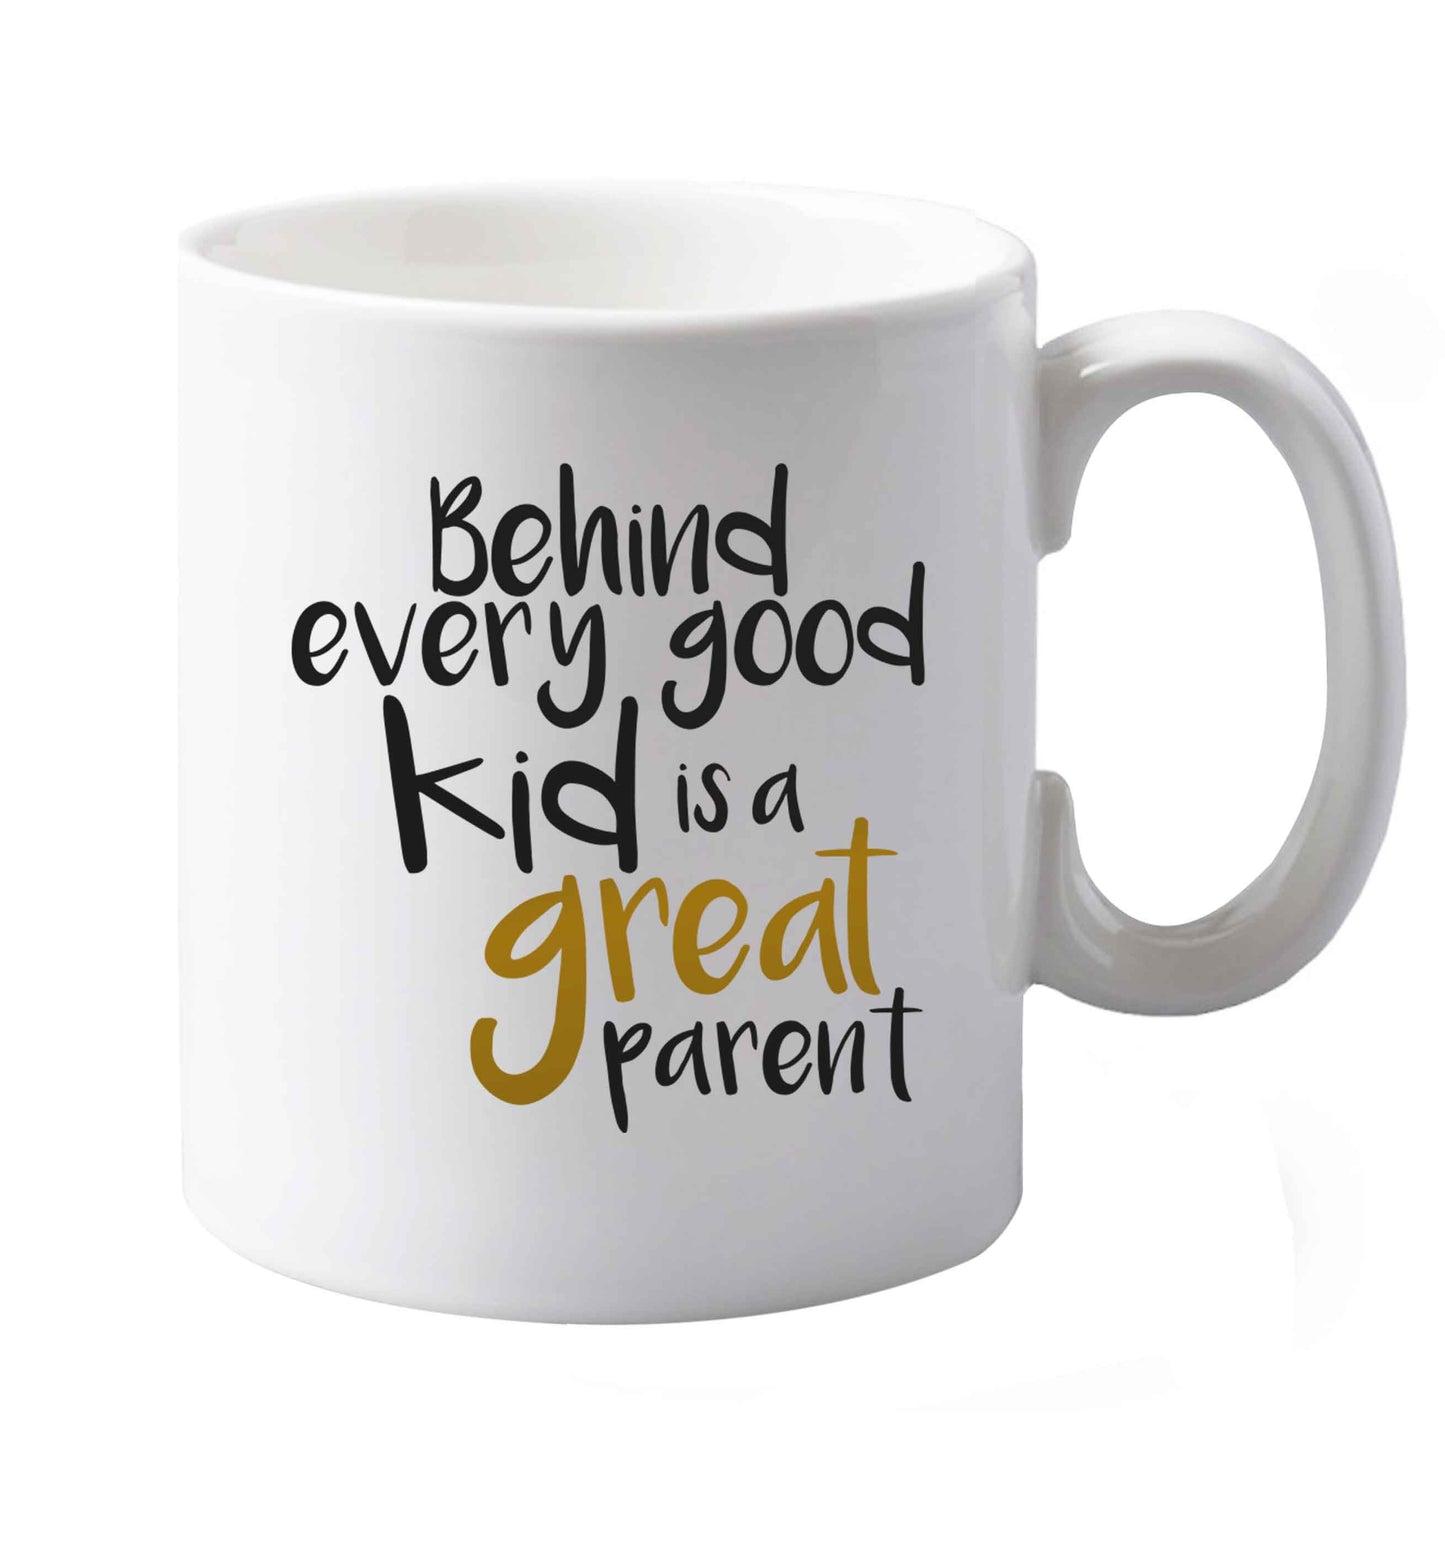 10 oz Behind every good kid is a great parent ceramic mug both sides